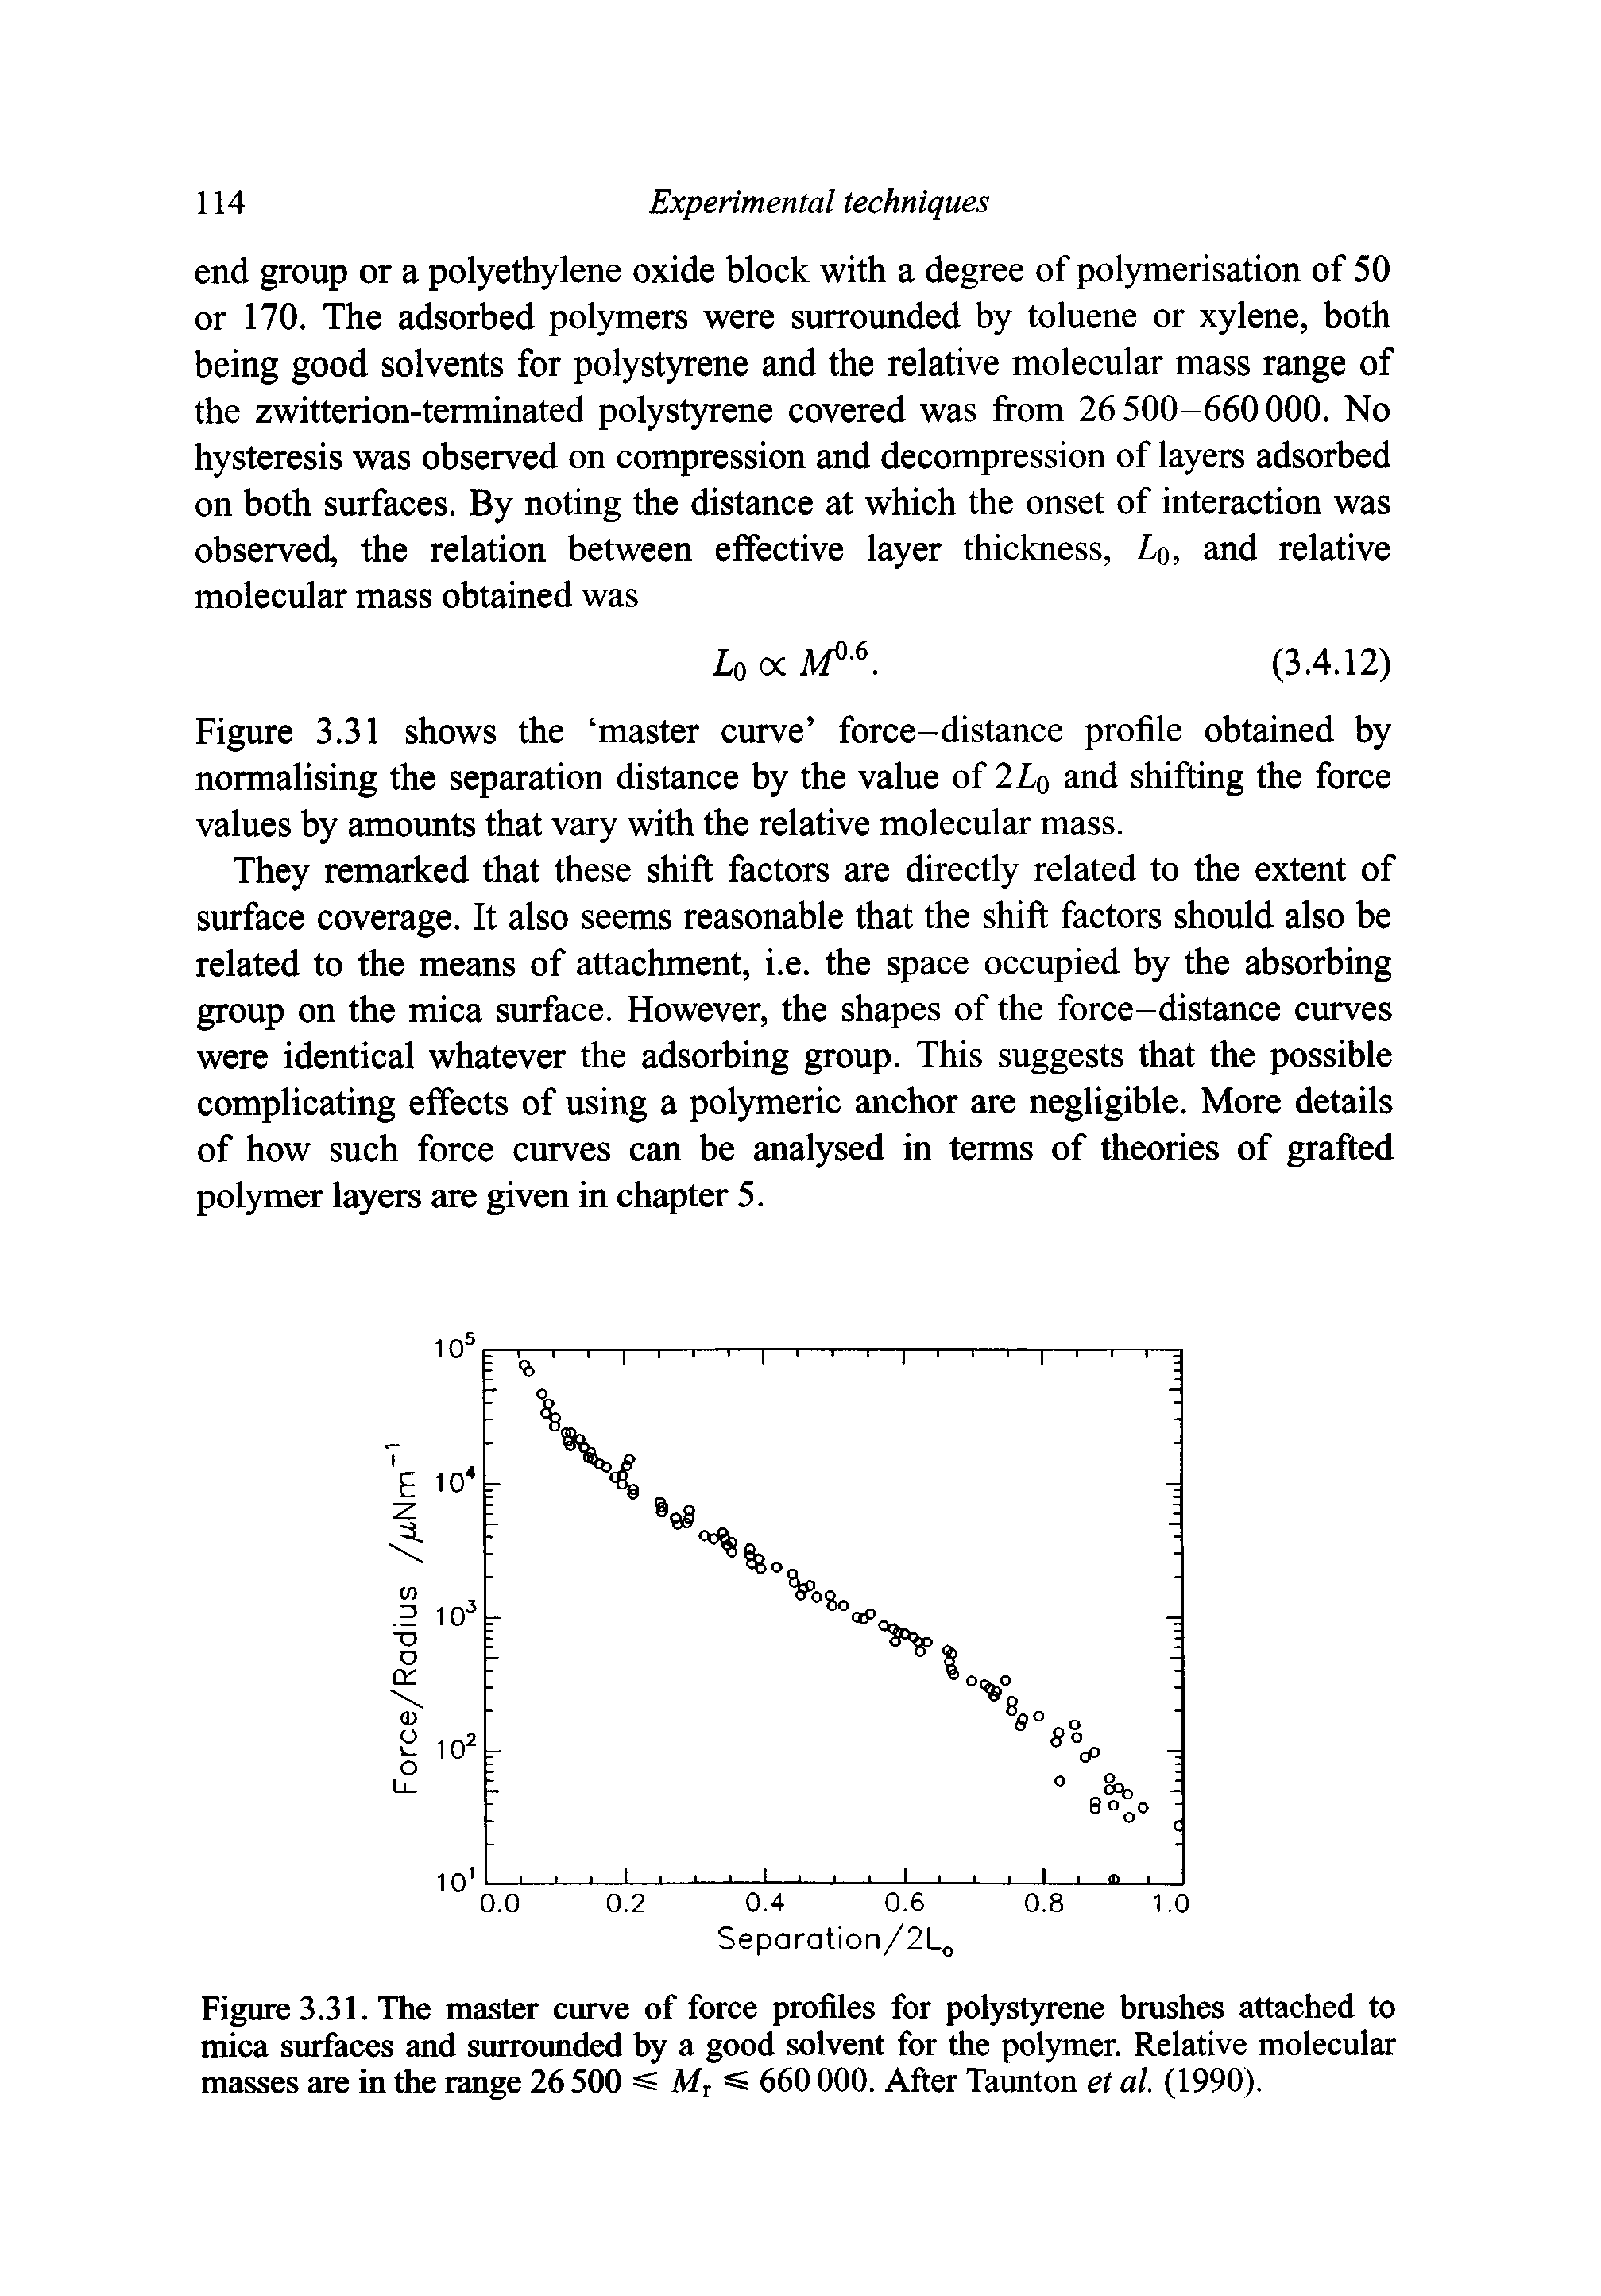 Figure 3.31. The master curve of force profiles for polystyrene brushes attached to mica surfaces and surrounded by a good solvent for the polymer. Relative molecular masses are in the range 26 500 Mi 660 000. After Taimton et al. (1990).